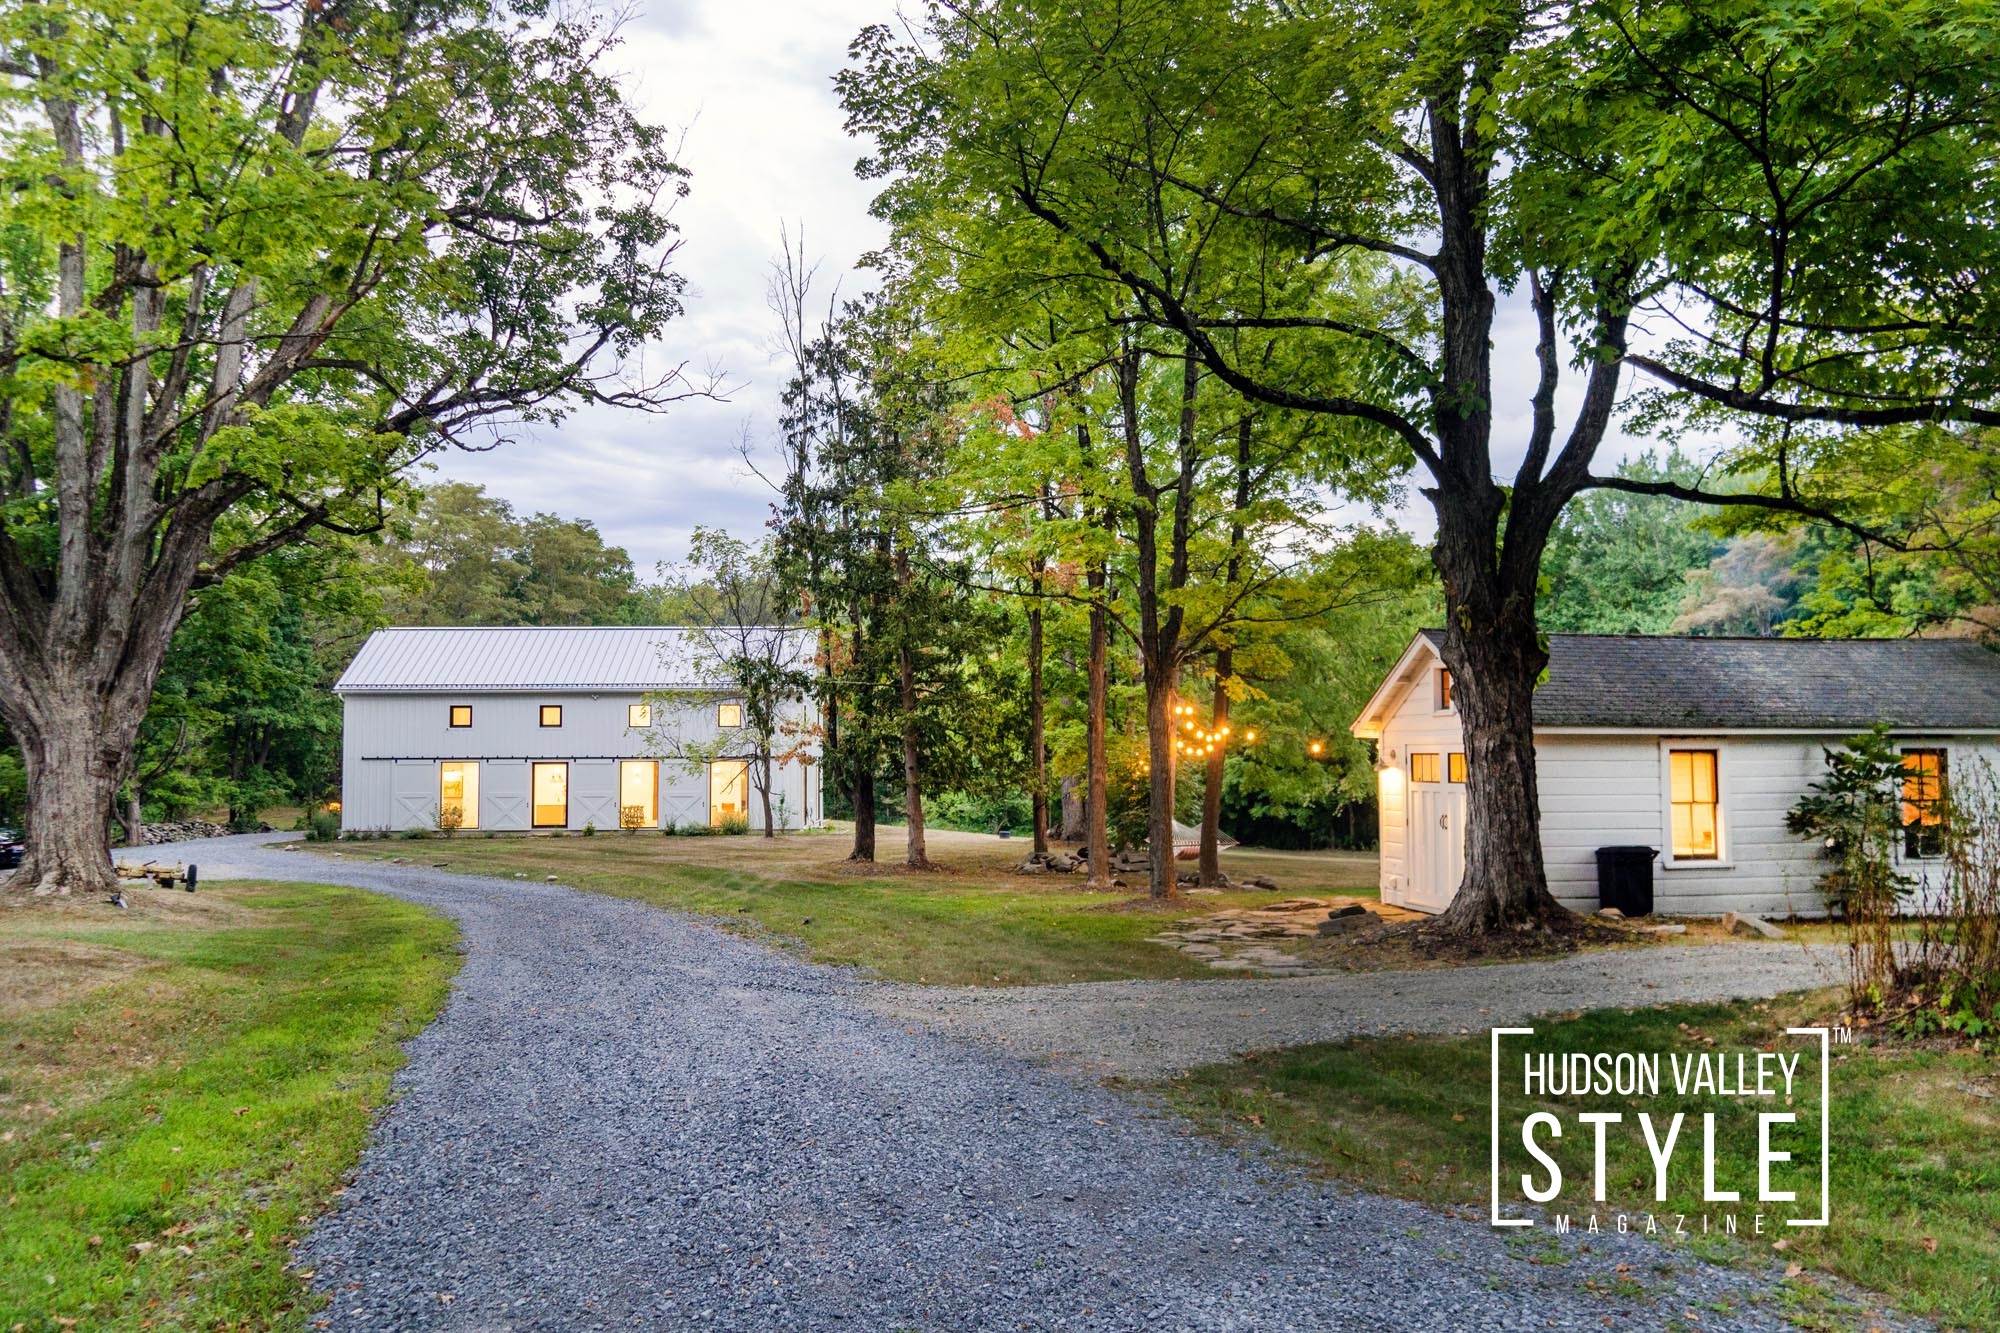 Spend a Weekend in a Charming Tiny Cottage on a Farm in the Hudson Valley – Airbnb Review by Photographer Maxwell Alexander / Alluvion Media – Best Airbnb Photography in Upstate, NY and the Hamptons